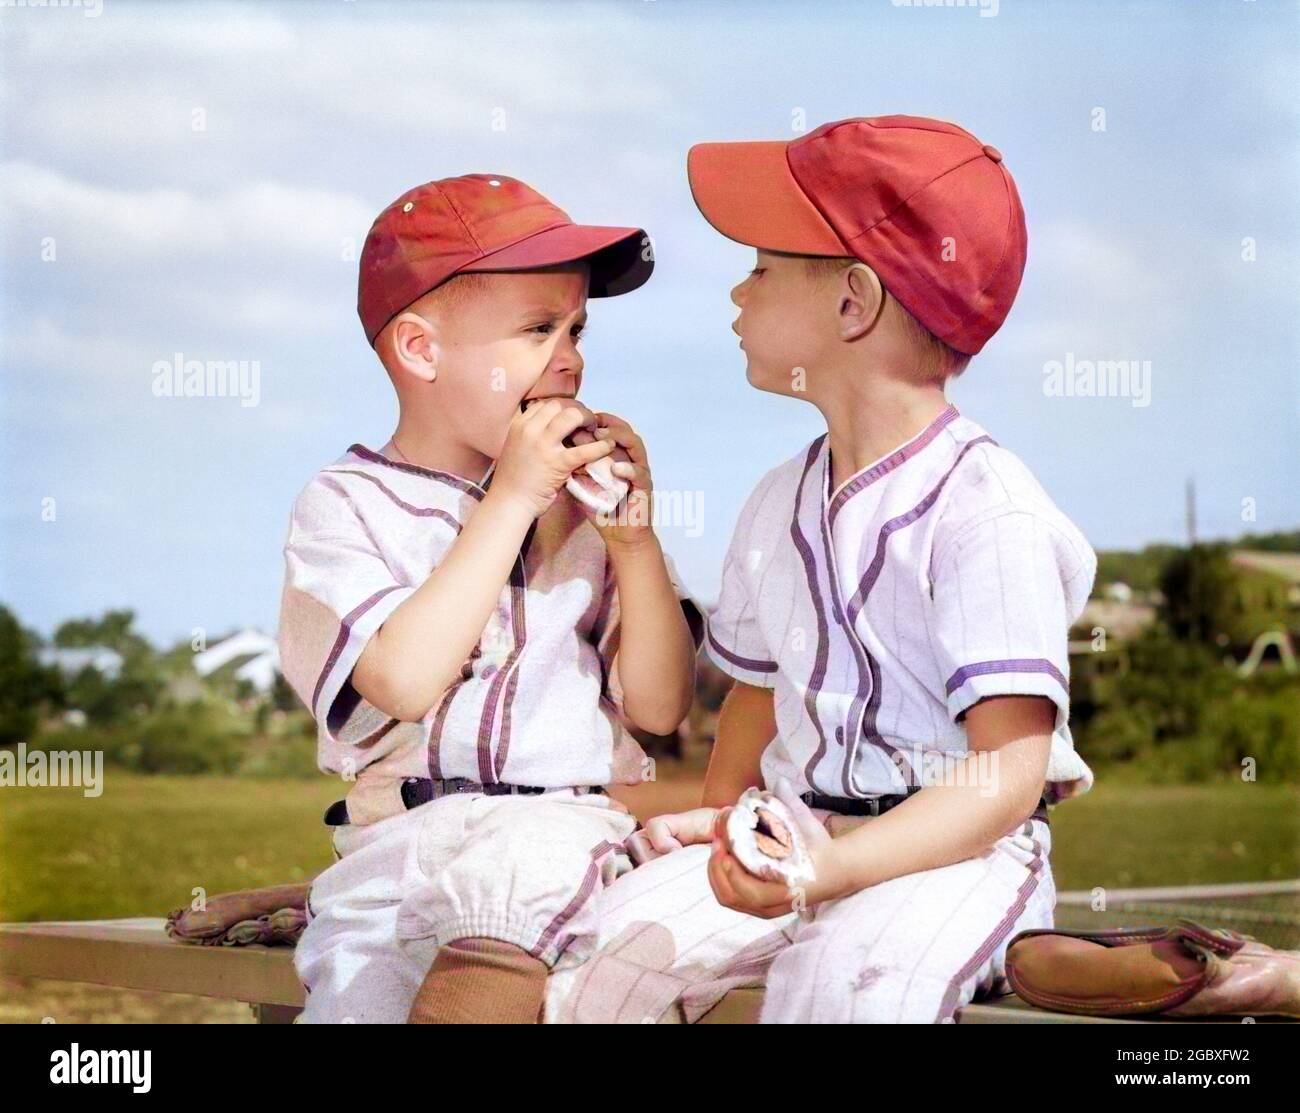 1960s TWO BOYS IN LITTLE LEAGUE BASEBALL CAPS AND UNIFORMS SITTING TOGETHER EATING HOT DOGS - f11898c HAR001 HARS BROTHER OLD FASHION JUVENILE LEAGUE FRIEND COMPETITION SNACK SATISFACTION BROTHERS RURAL SEATED COPY SPACE FRIENDSHIP HALF-LENGTH ADOLESCENT SIT SIBLINGS AMERICANA HOTDOG FOODS SNACK FOODS SNACKS HUNGRY LITTLE LEAGUE ARCHIVAL SNACK FOOD MITT FRANKFURTER RECREATION PAL HUNGER PRETEEN SIBLING UNIFORMS FRANK WIENER BASEBALL GLOVE CAPS COMPANION HOT-DOG WIENERS HOT DOG HOT DOGS HOT-DOGS JUVENILES MISCELLANEOUS RELAXATION TOGETHERNESS YOUNGSTER BUDDY CAUCASIAN ETHNICITY COMPANIONSHIP Stock Photo